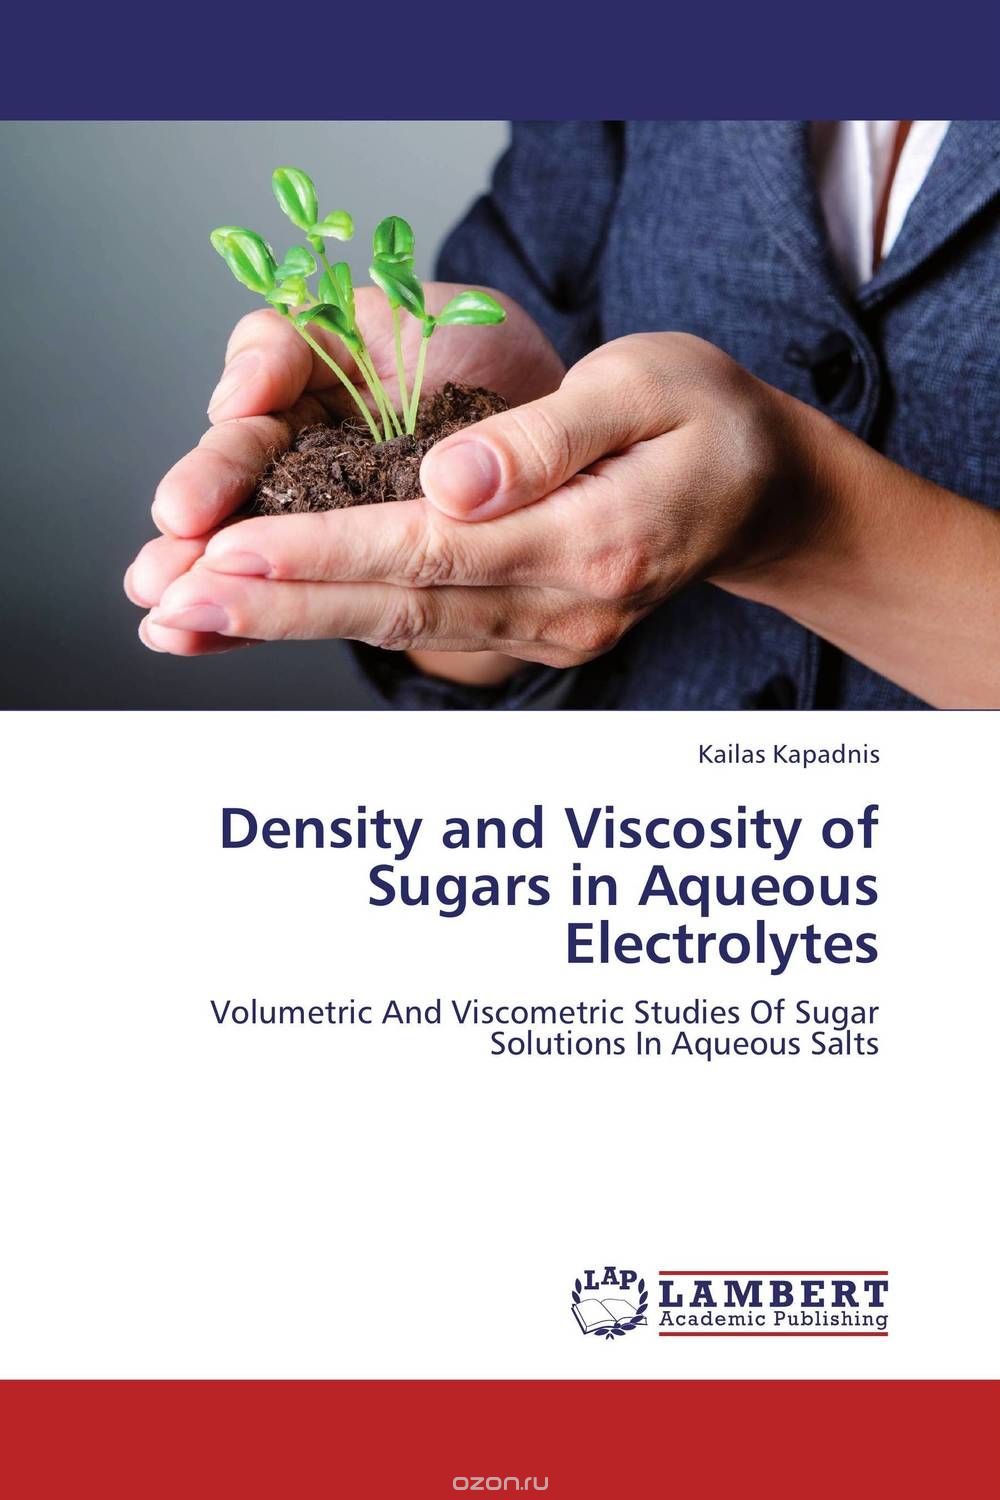 Density and Viscosity of Sugars in Aqueous Electrolytes